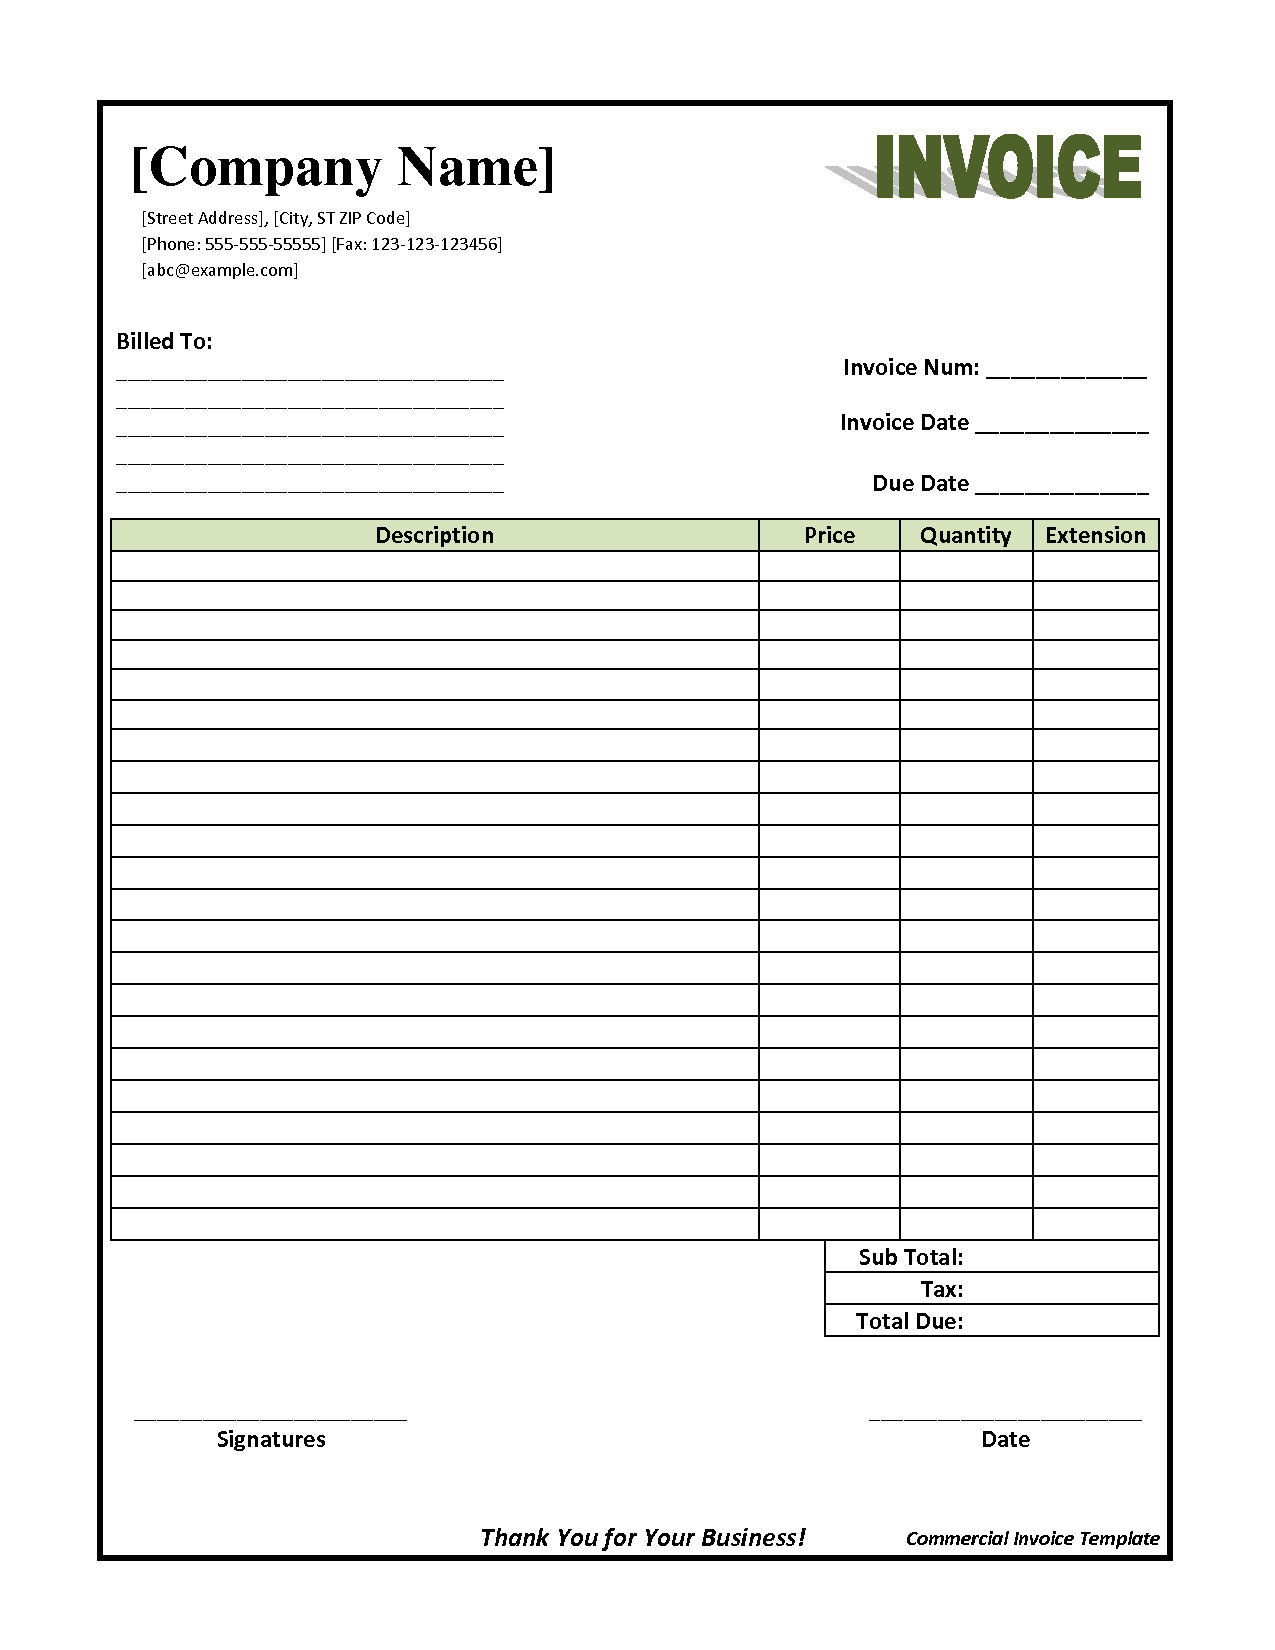 Commercial Invoice sample